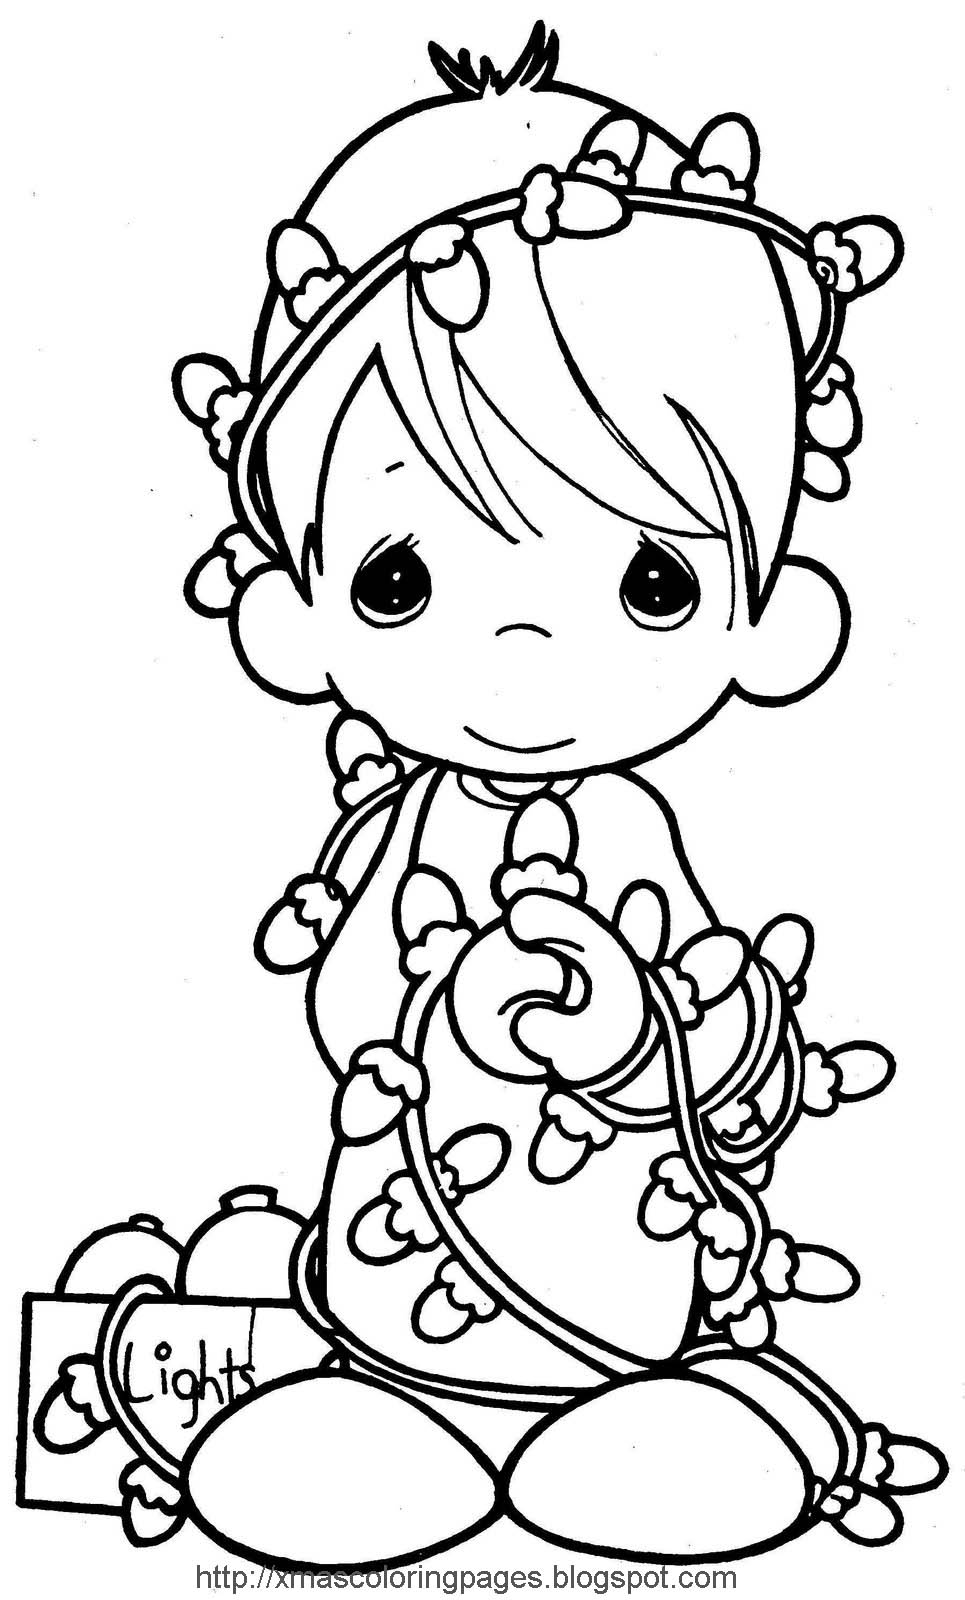 Printable Coloring Pages For Christmas 3